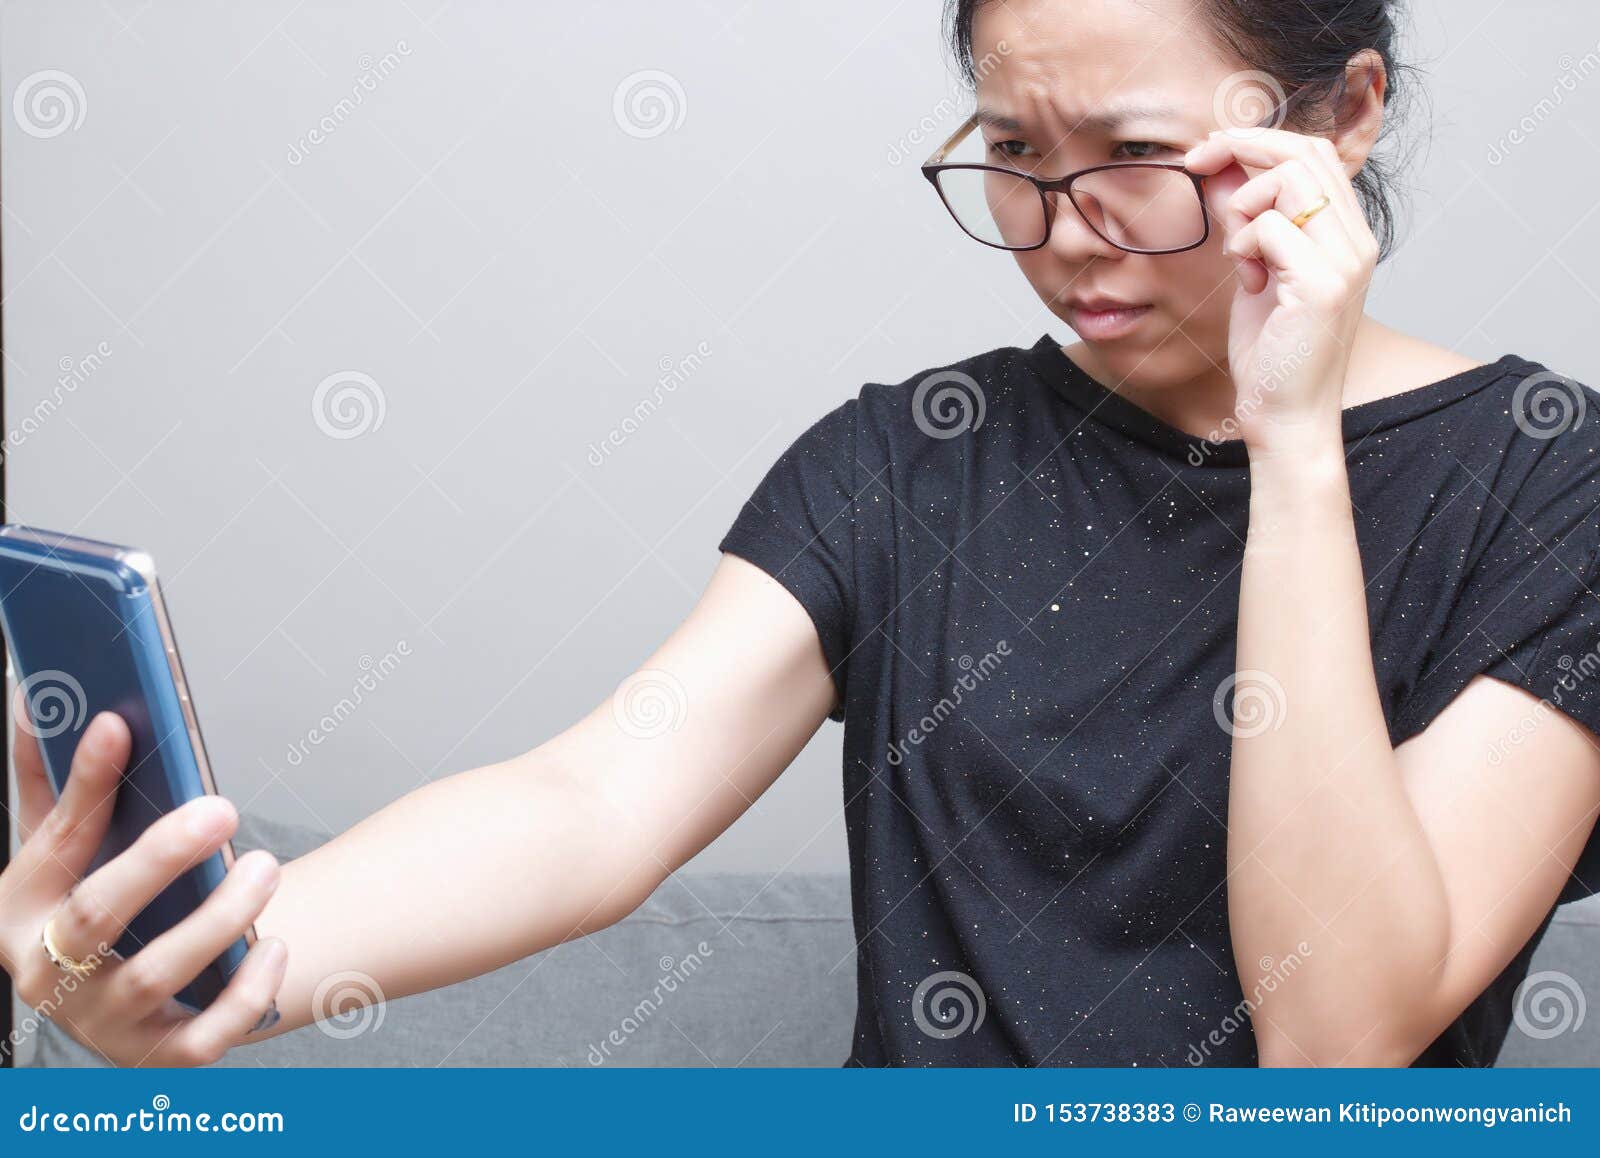 asian female trying to read something in her mobile phone. poor sight, farsightedness, myopia